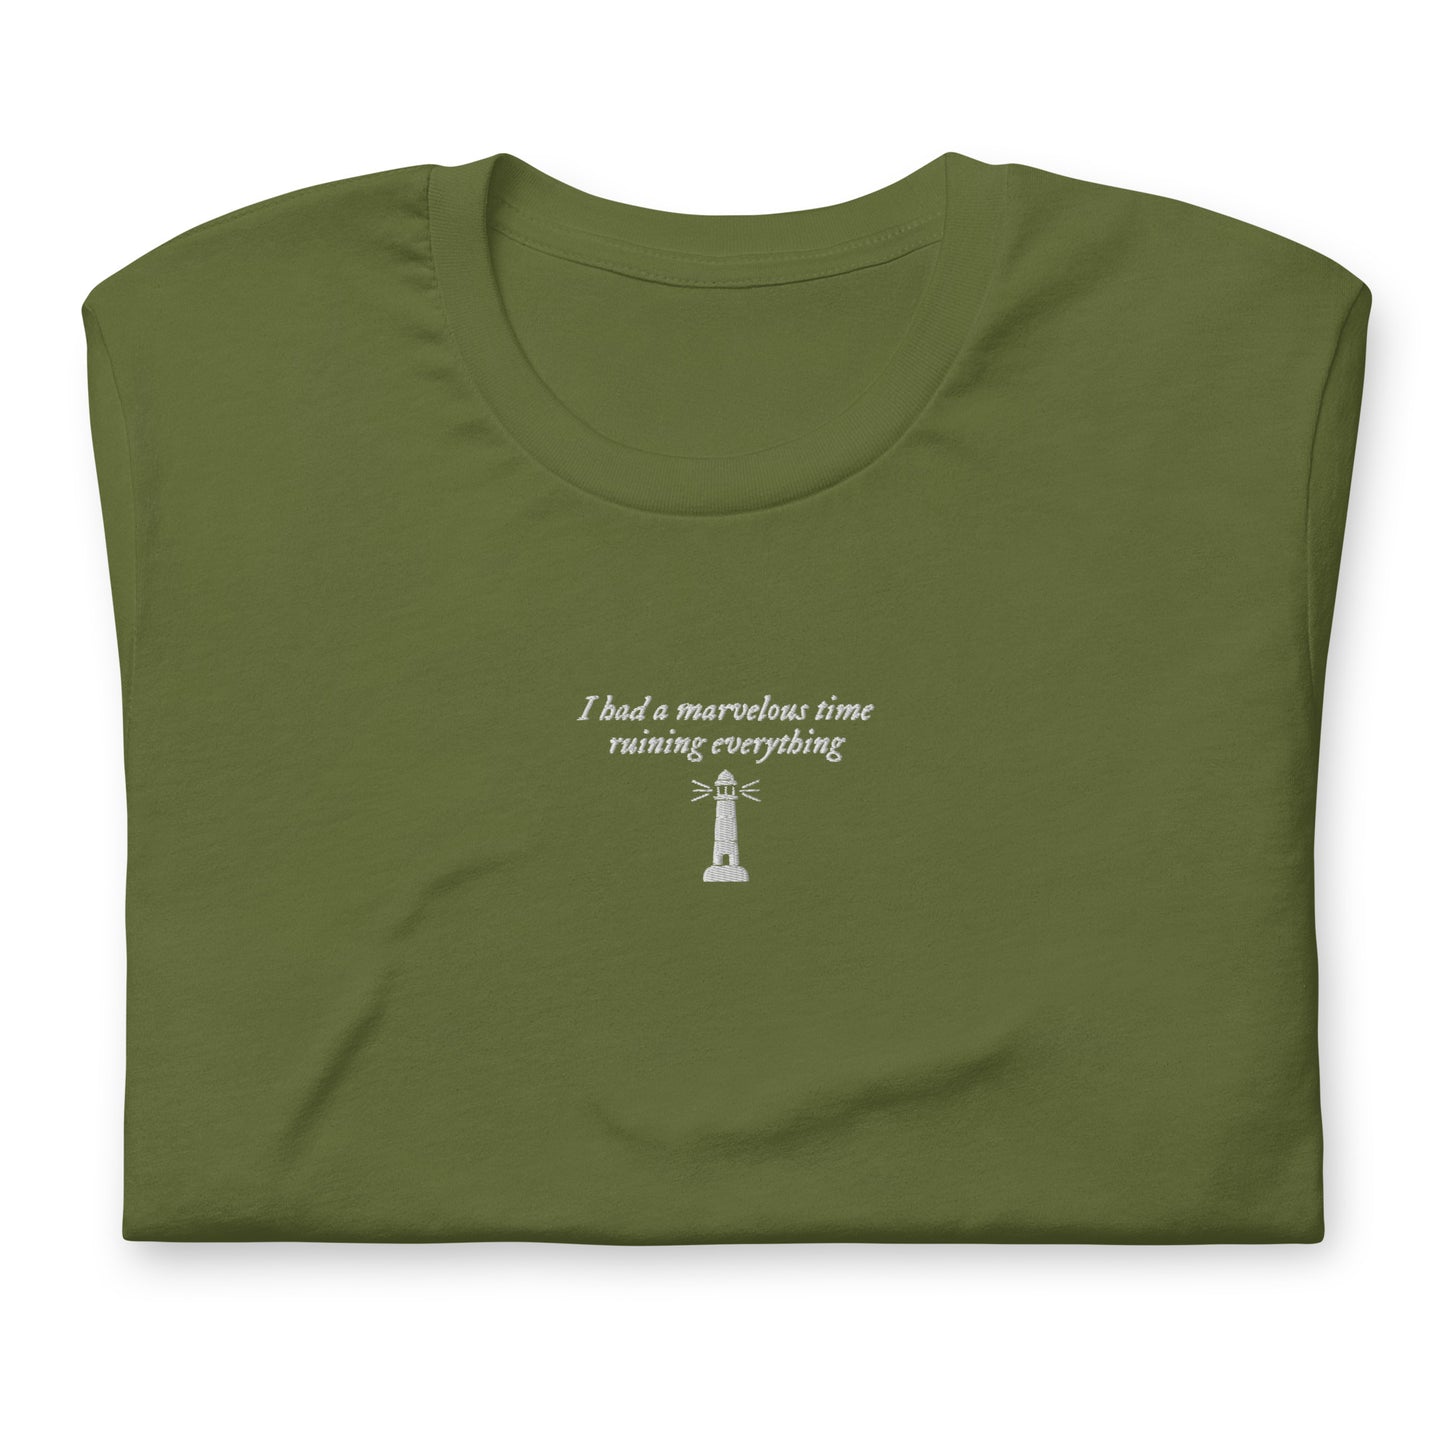 the marvelous time lighthouse embroidered bella + canvas t-shirt